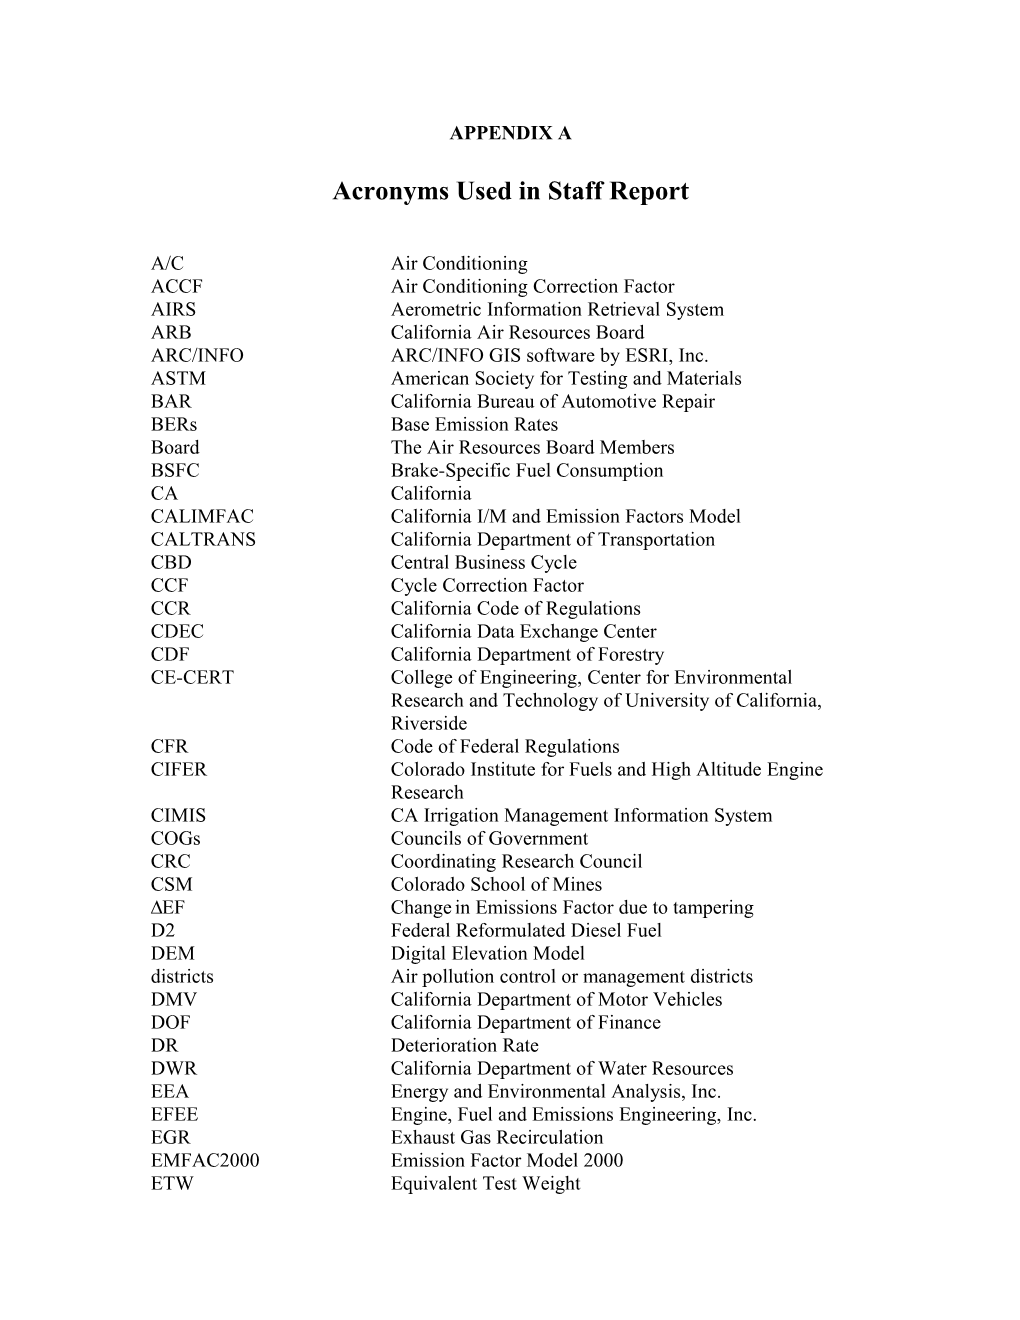 Acronyms Used in Staff Report